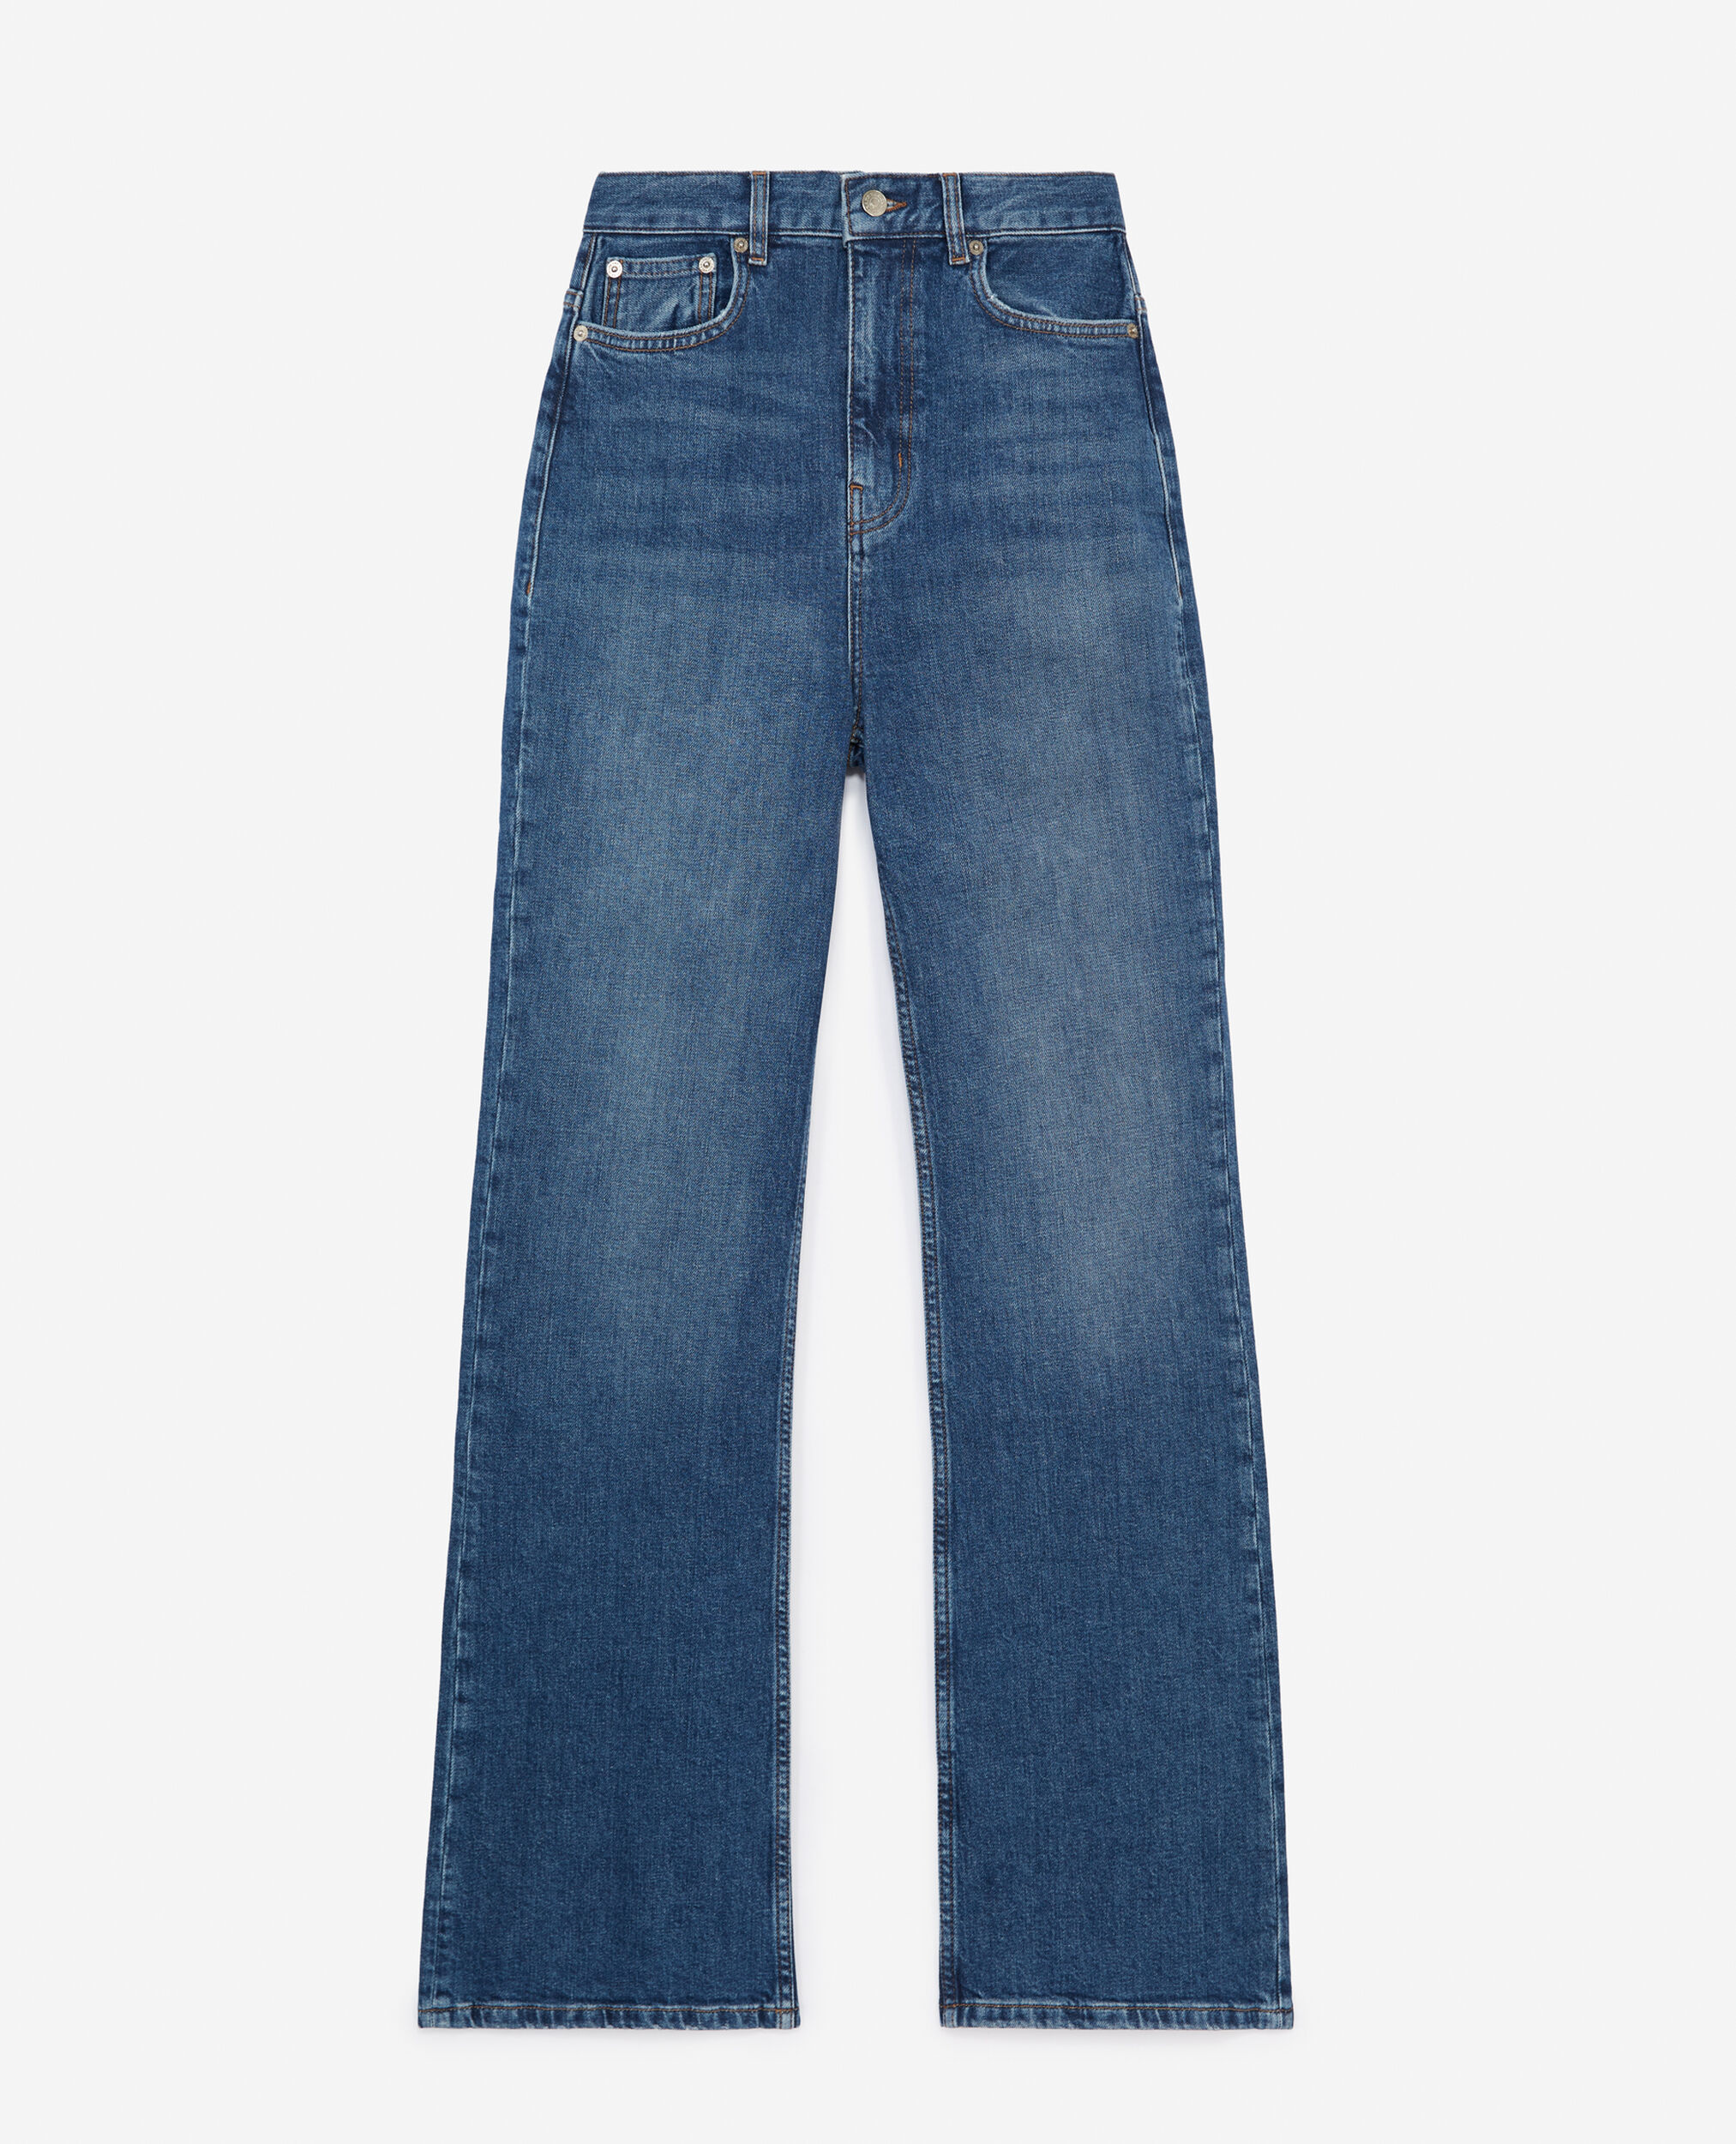 Jeans blau hohe Taille Bootcut, BLUE DENIM, hi-res image number null